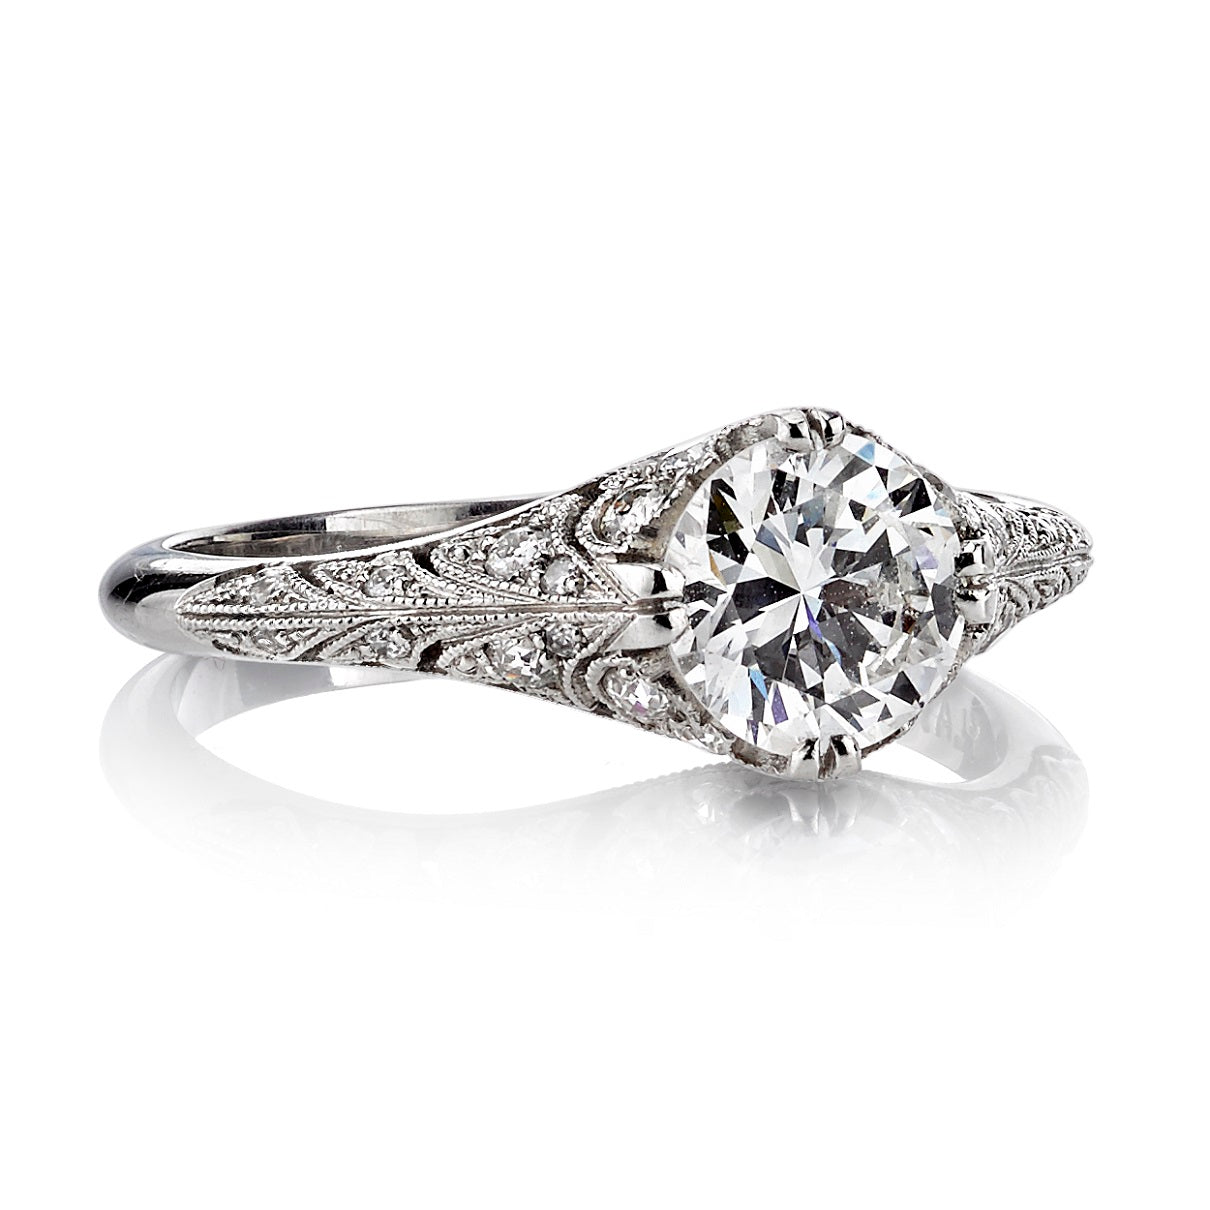 SINGLE STONE CHARLOTTE RING featuring 1.04ct I/VS2 EGL certified old European cut diamond with 0.25ctw old European cut accent diamonds set in a handcrafted platinum mounting.